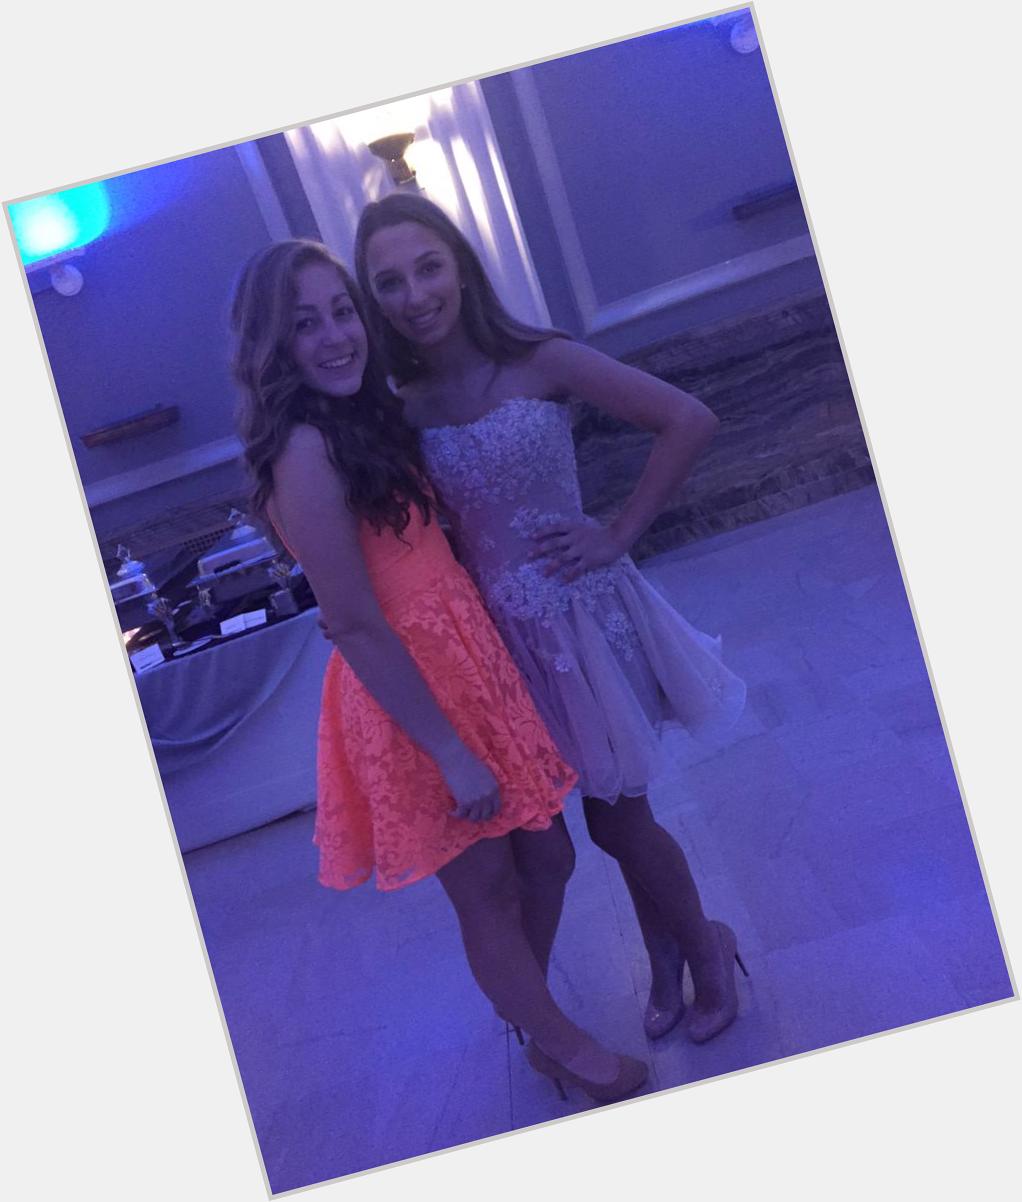 Happy birthday amanda   hope you have a great dayy and can\t wait for dance w you again this year!! 